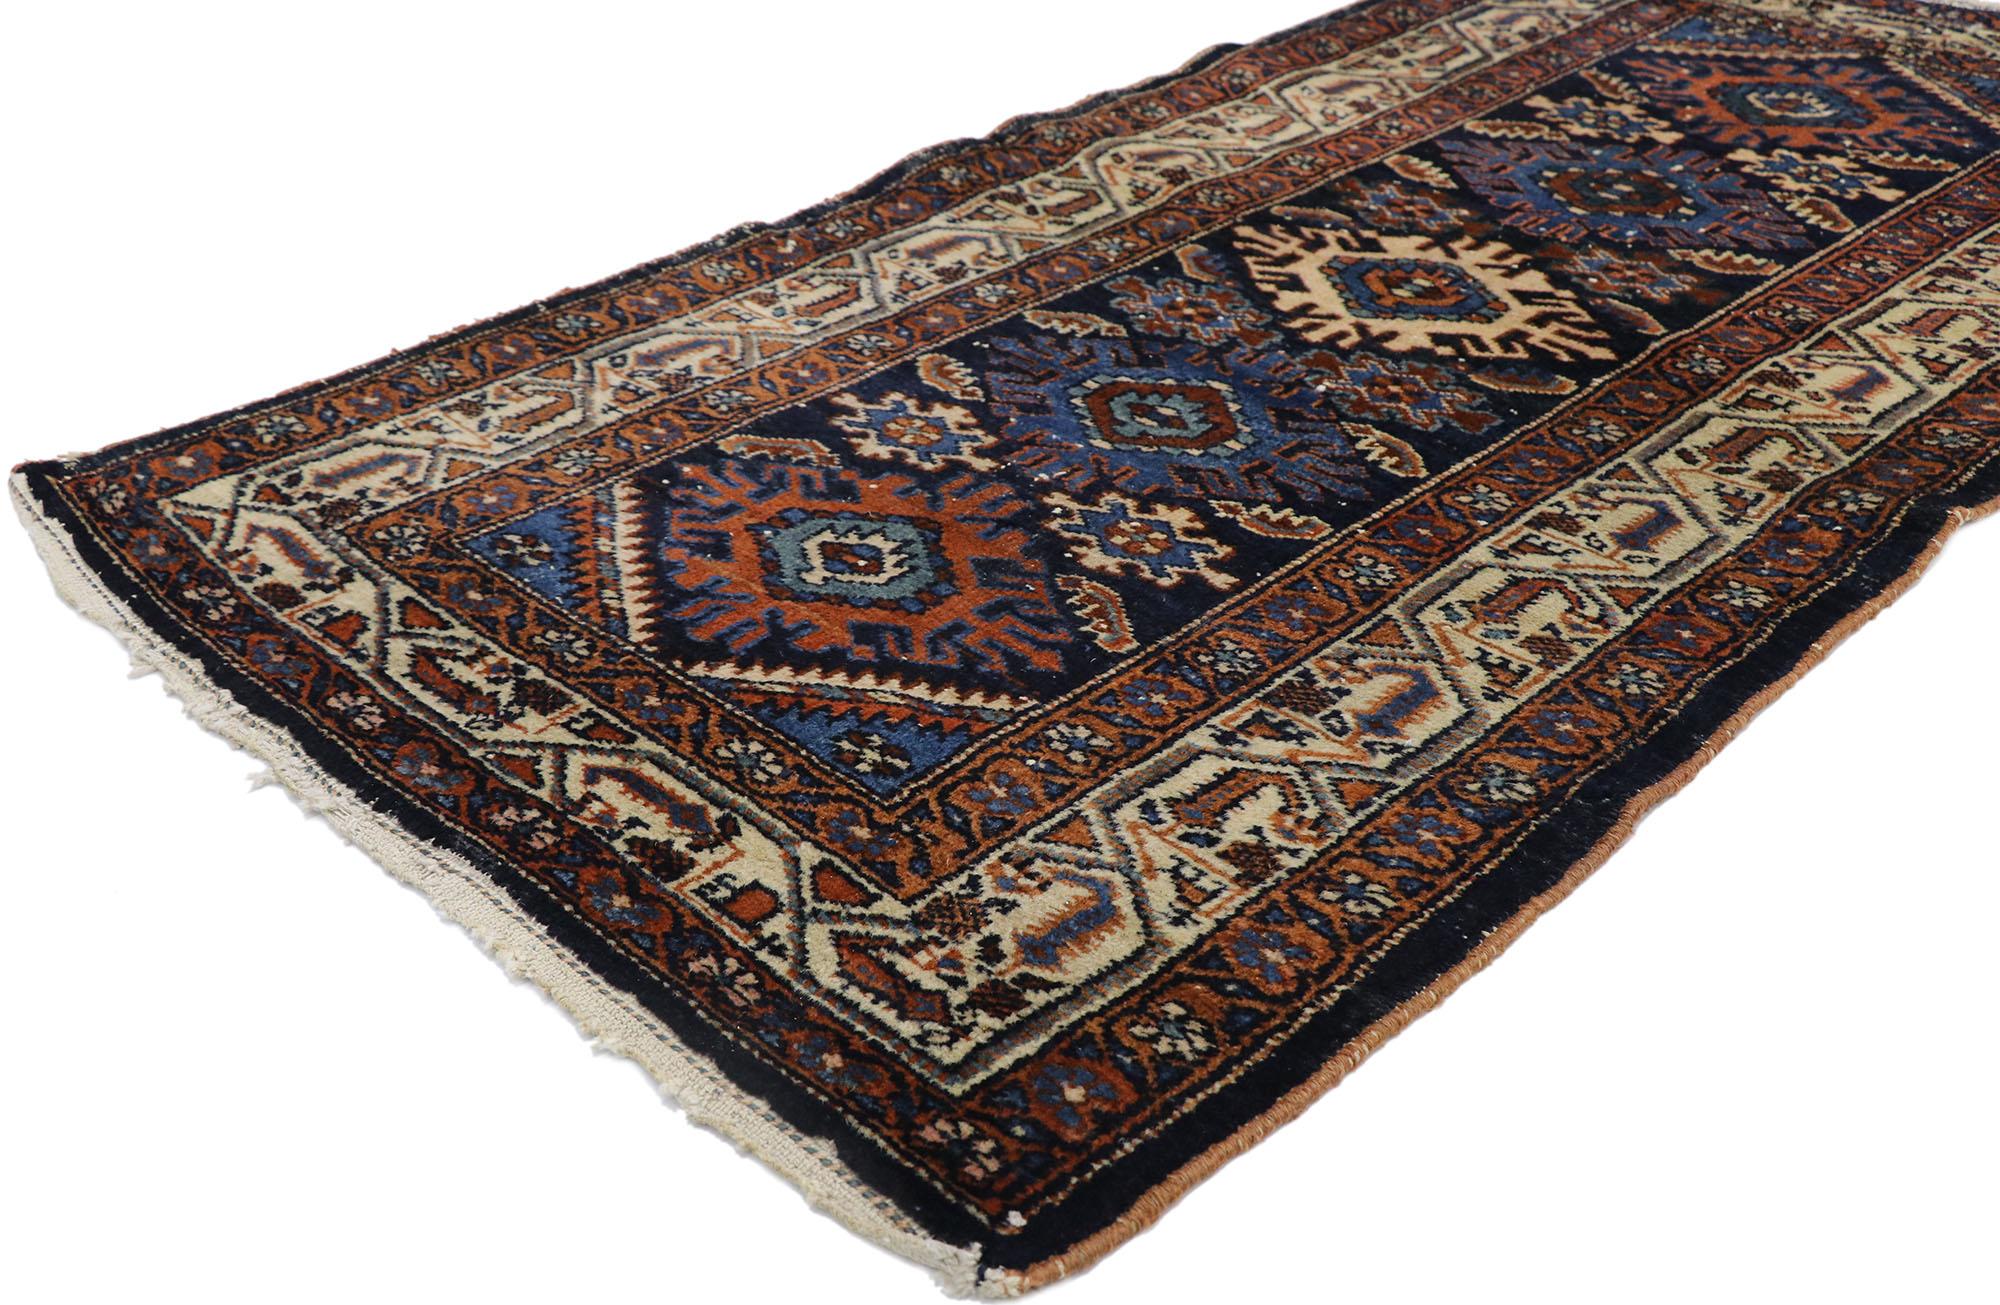 78053 vintage Persian Heriz rug with Tribal style 02'08 x 04'10. Full of tiny details and a bold expressive design combined with lively colors and tribal style, this hand-knotted wool vintage Persian Heriz rug is a captivating vision of woven